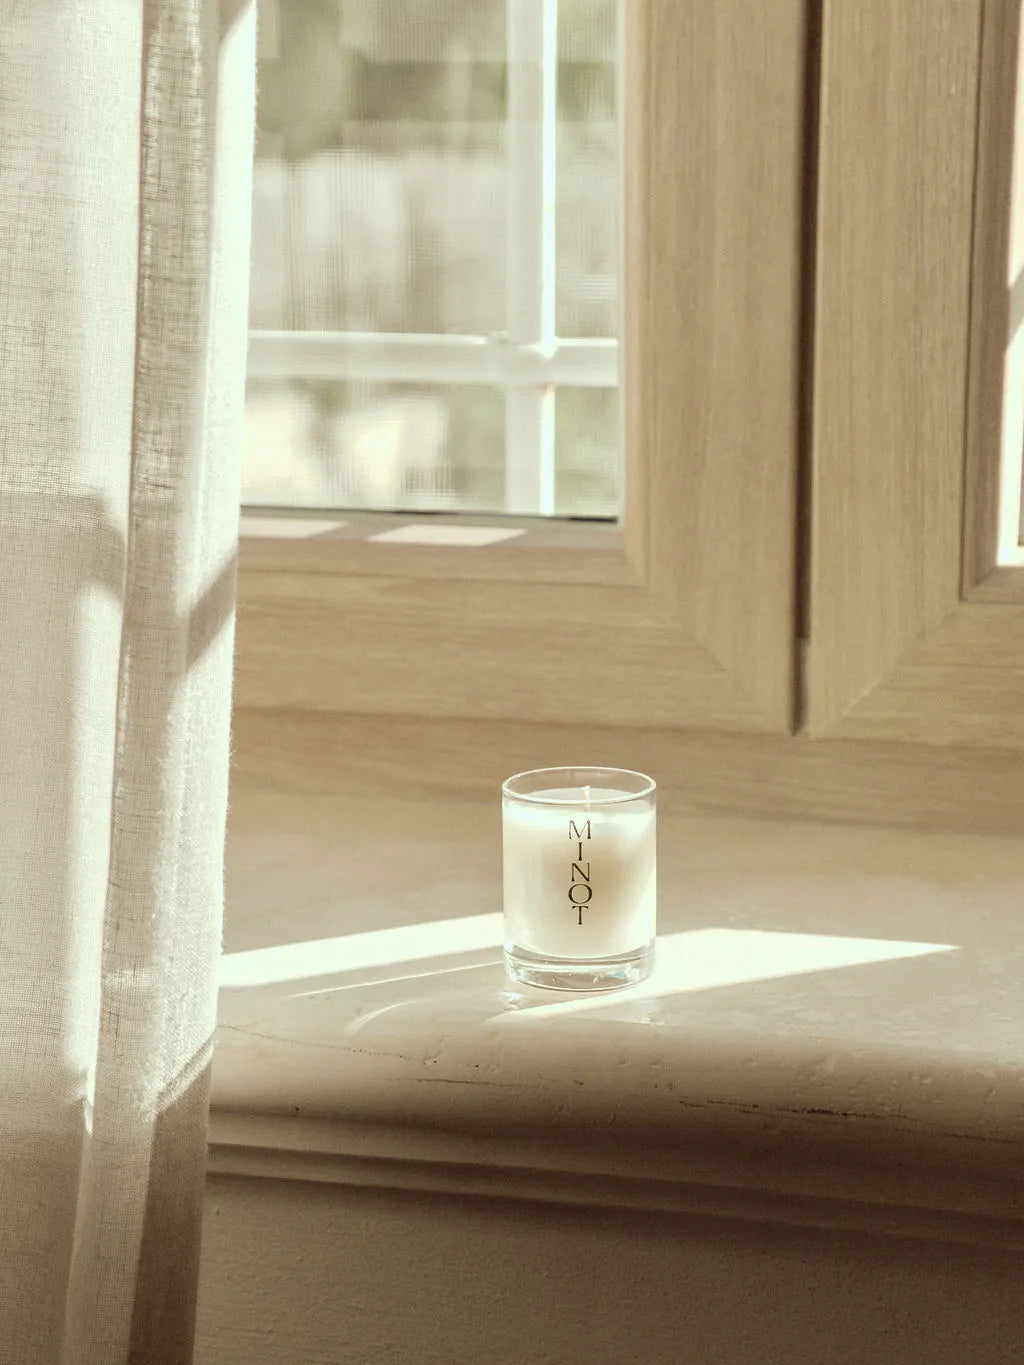 The Atmosphere Mini candle embodies the minimalist aesthetic sitting on a pale wooden windowsill